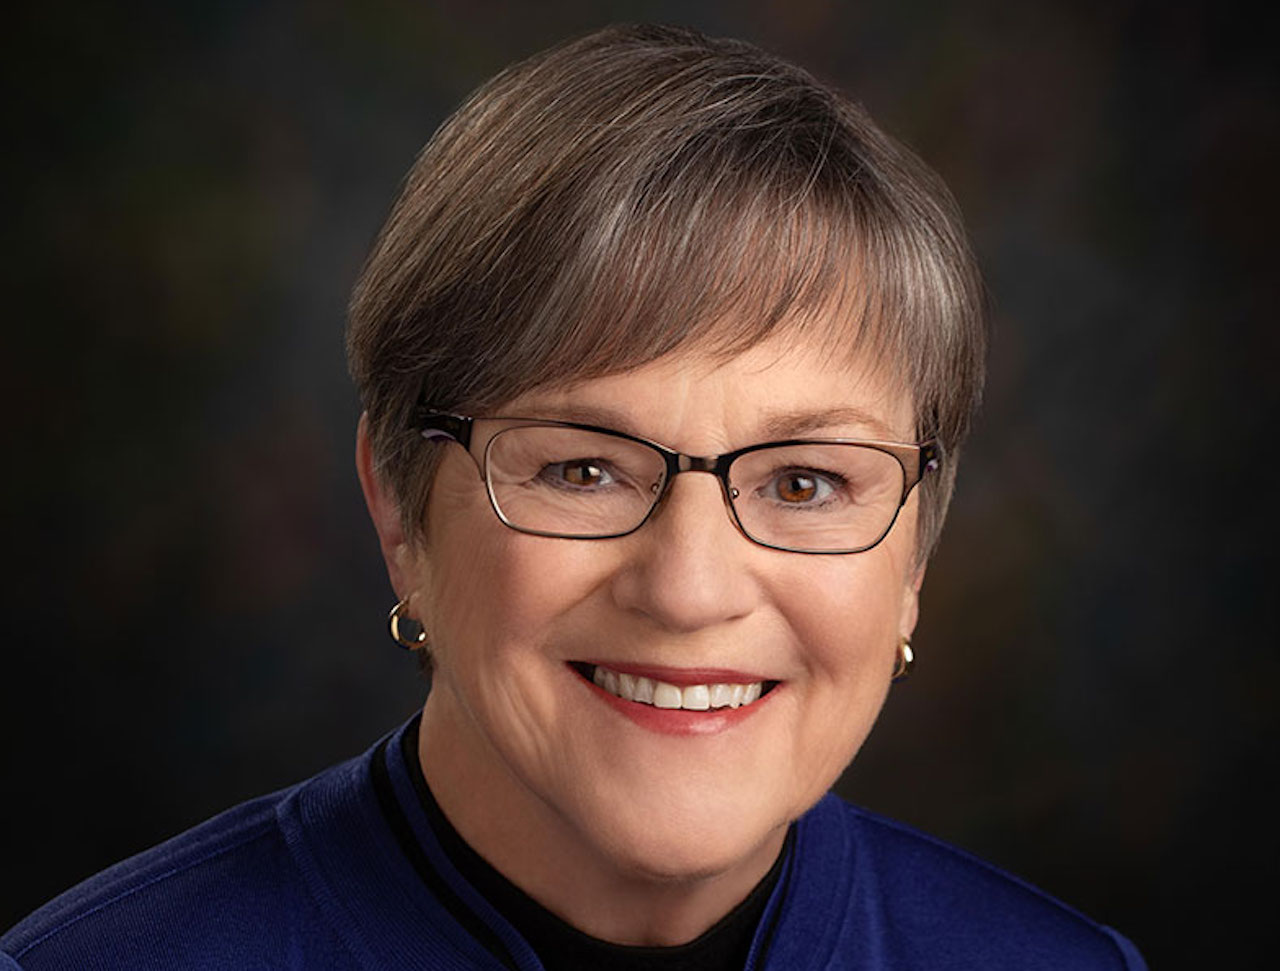 “These needed rail infrastructure improvements will lift up rural Kansas and, in doing so, will maximize the economic potential of the entire state,” said Gov. Laura Kelly.